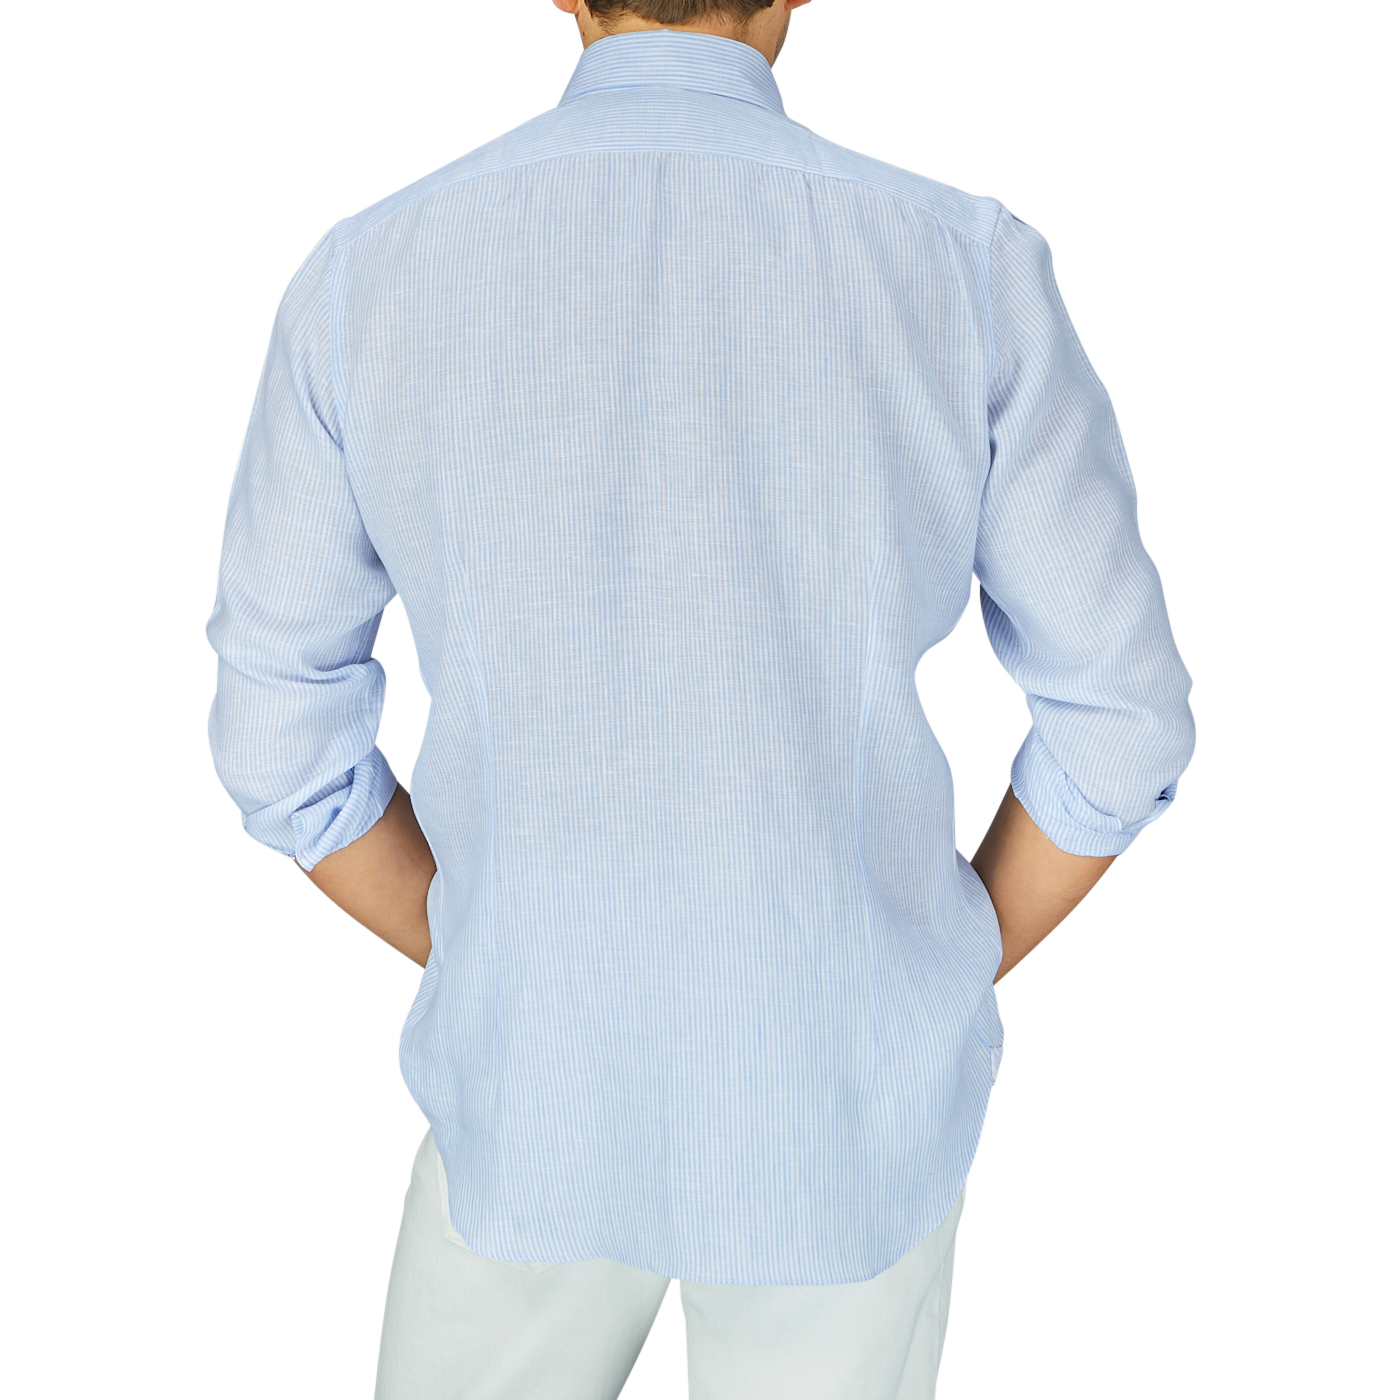 A person viewed from behind, wearing a Mazzarelli Blue Striped Organic Linen BD Regular Fit Shirt and light-colored pants.